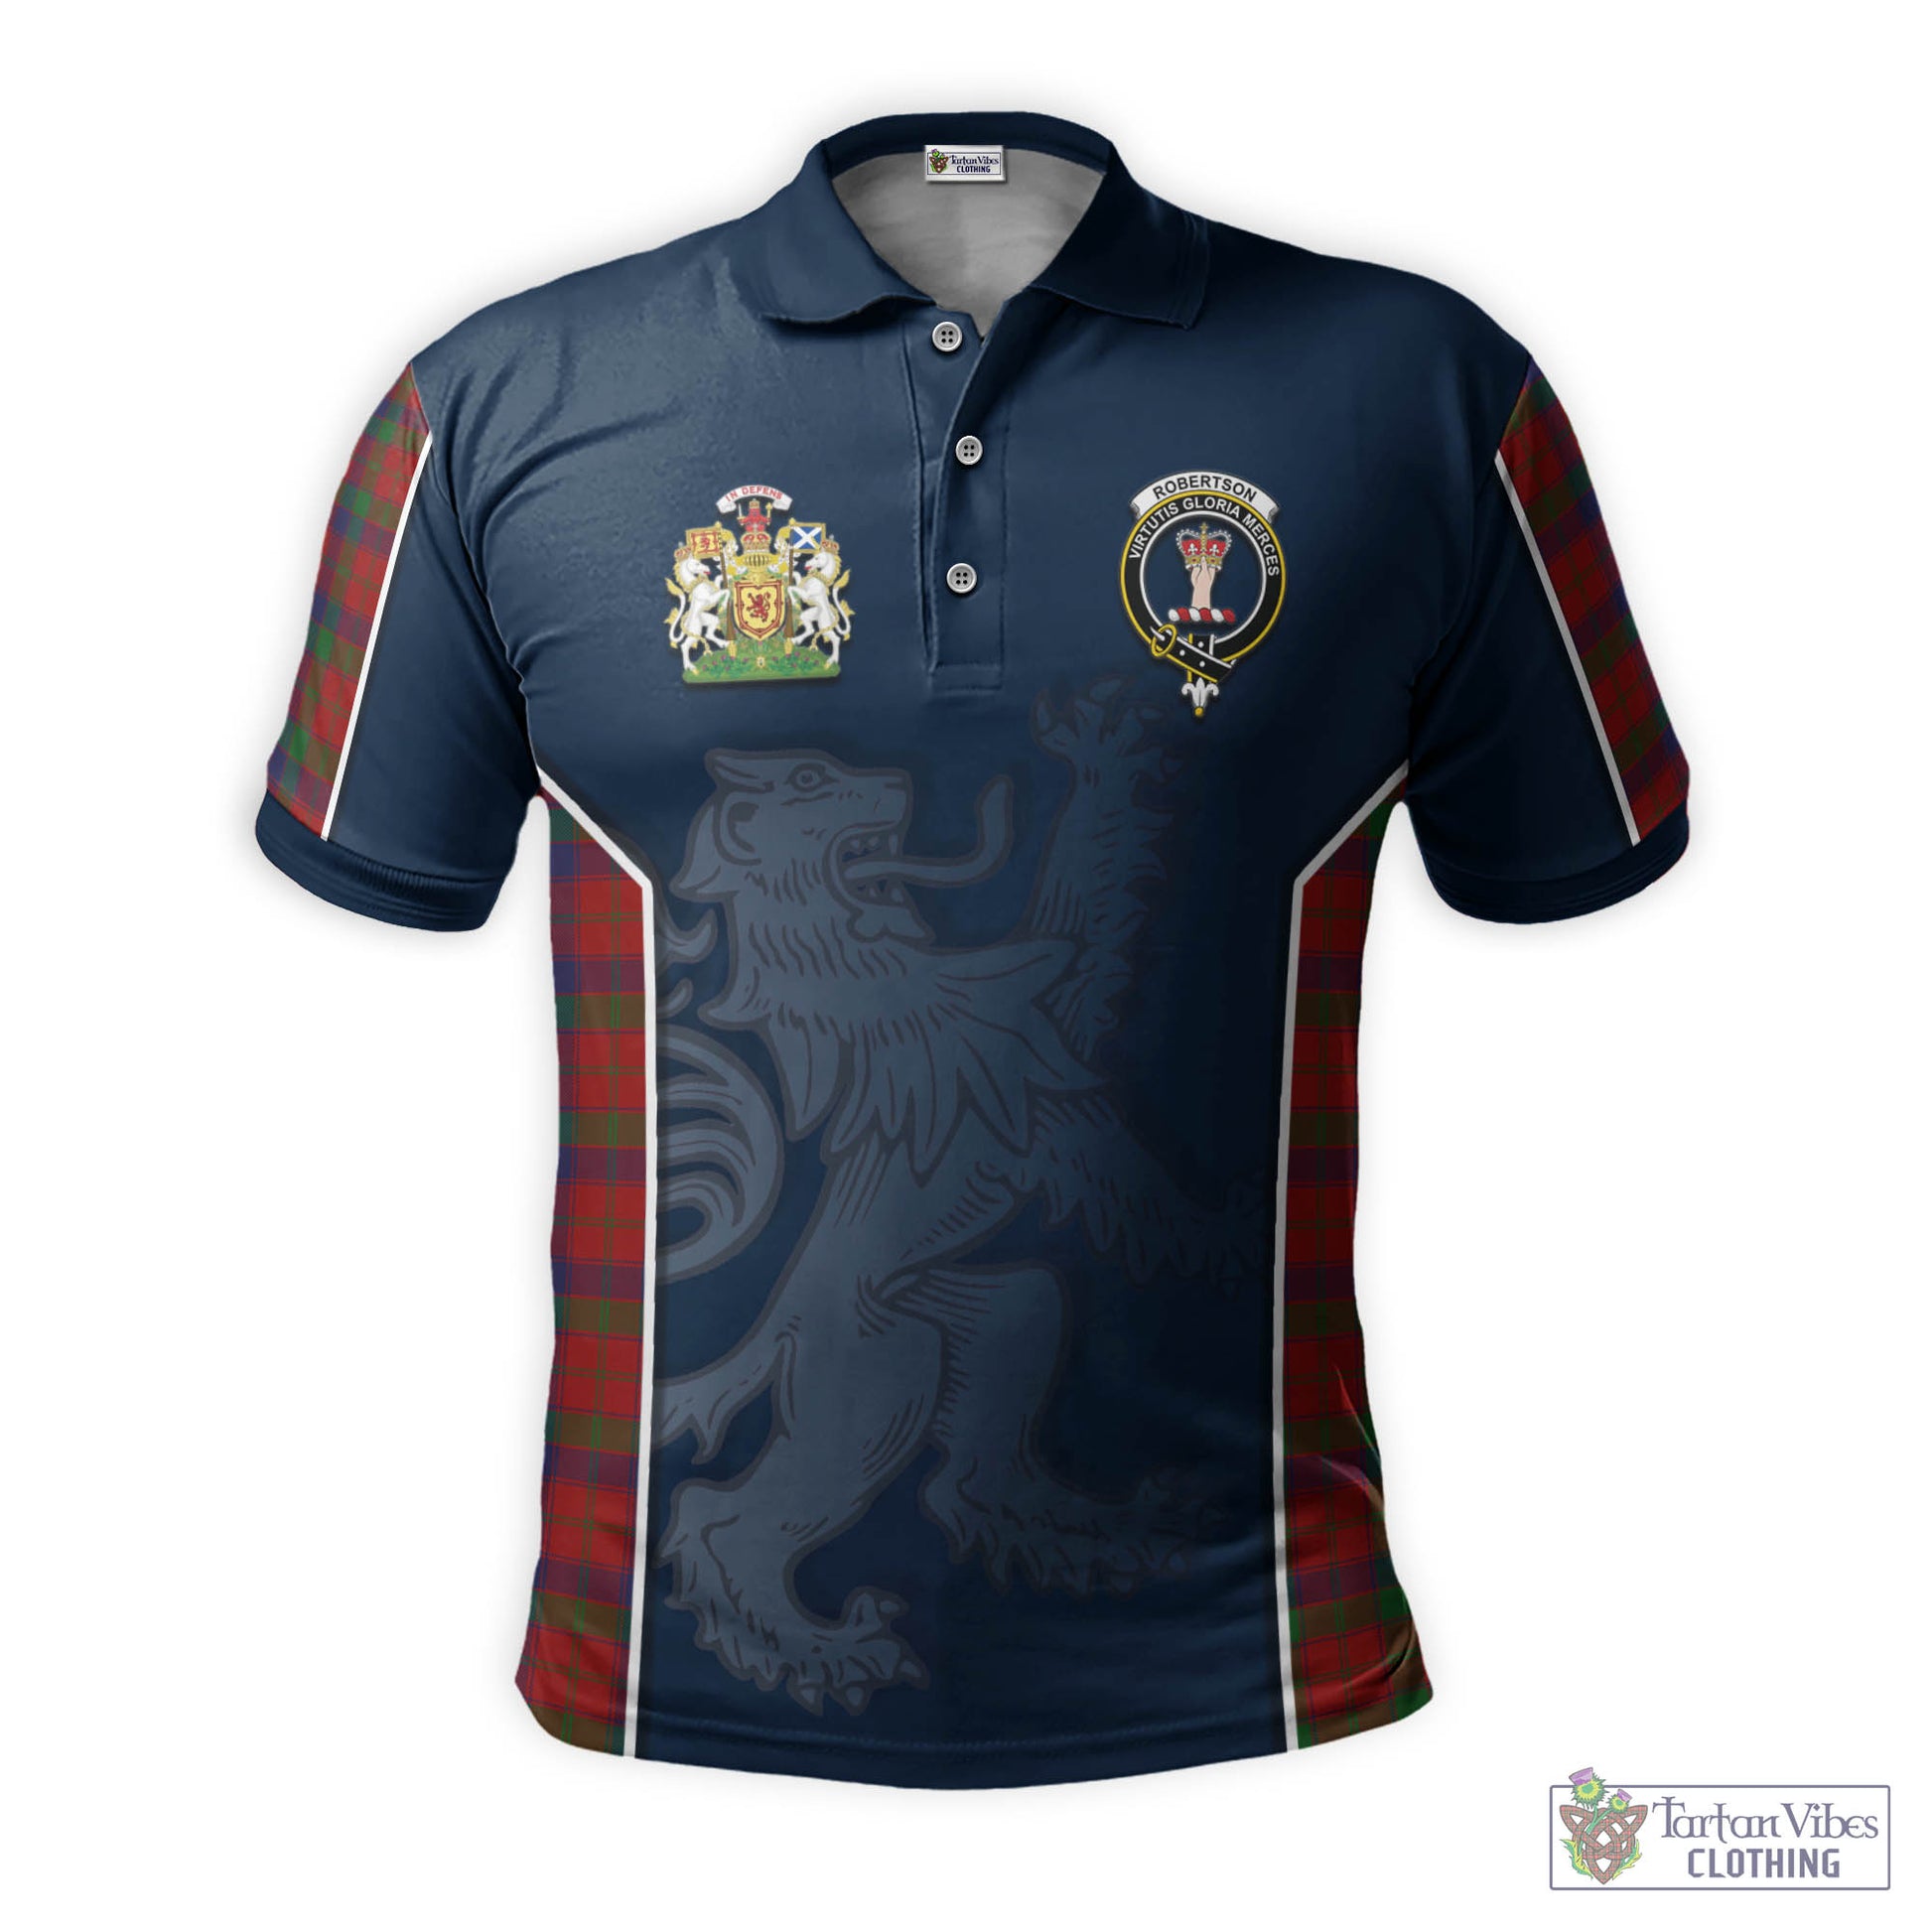 Tartan Vibes Clothing Robertson Tartan Men's Polo Shirt with Family Crest and Lion Rampant Vibes Sport Style